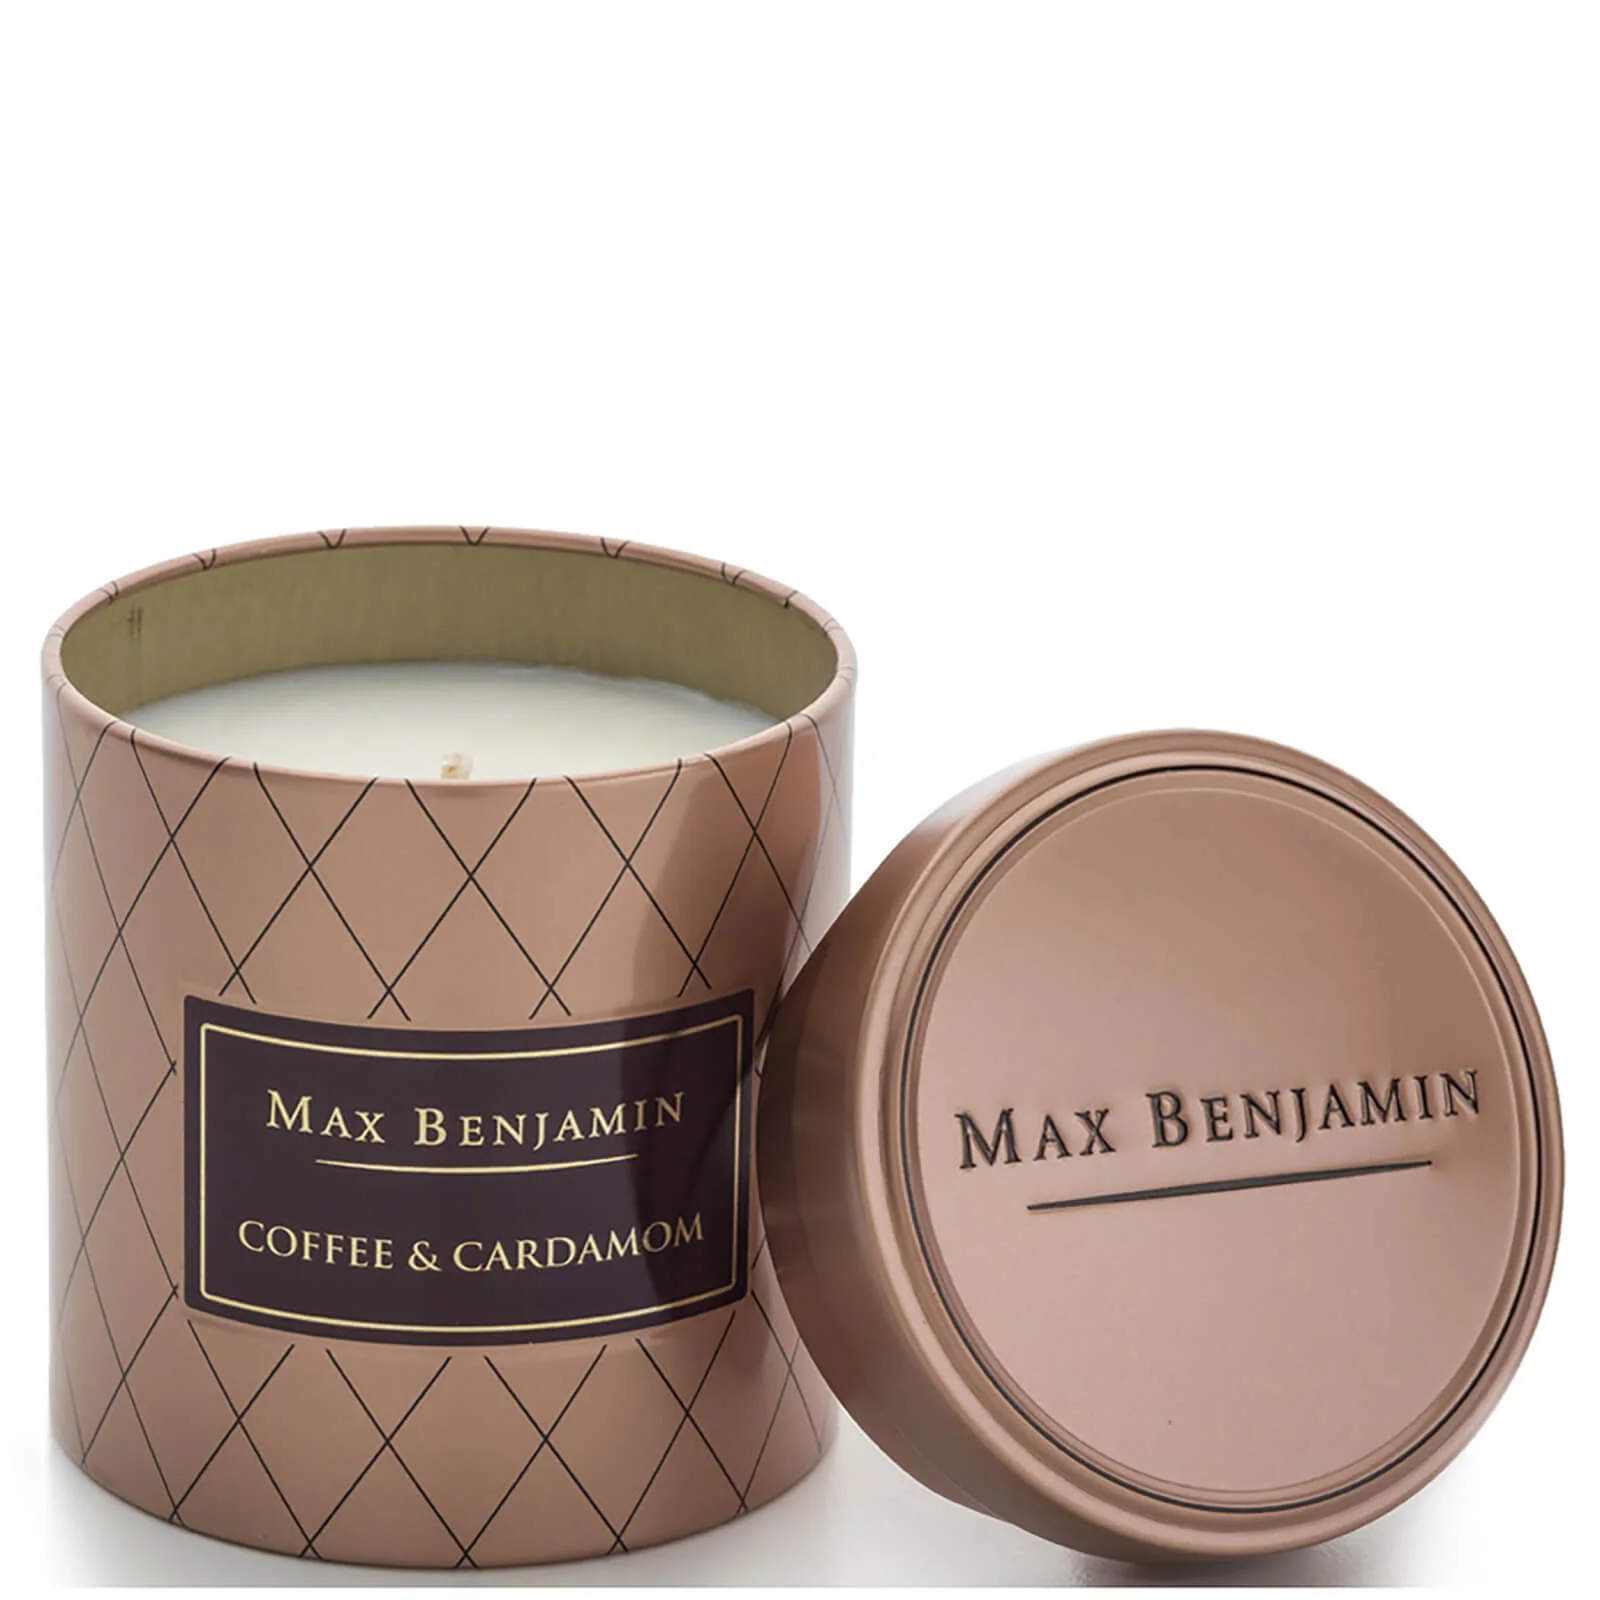 Max Benjamin Scented Candle - Coffee and Cardamom Image 1